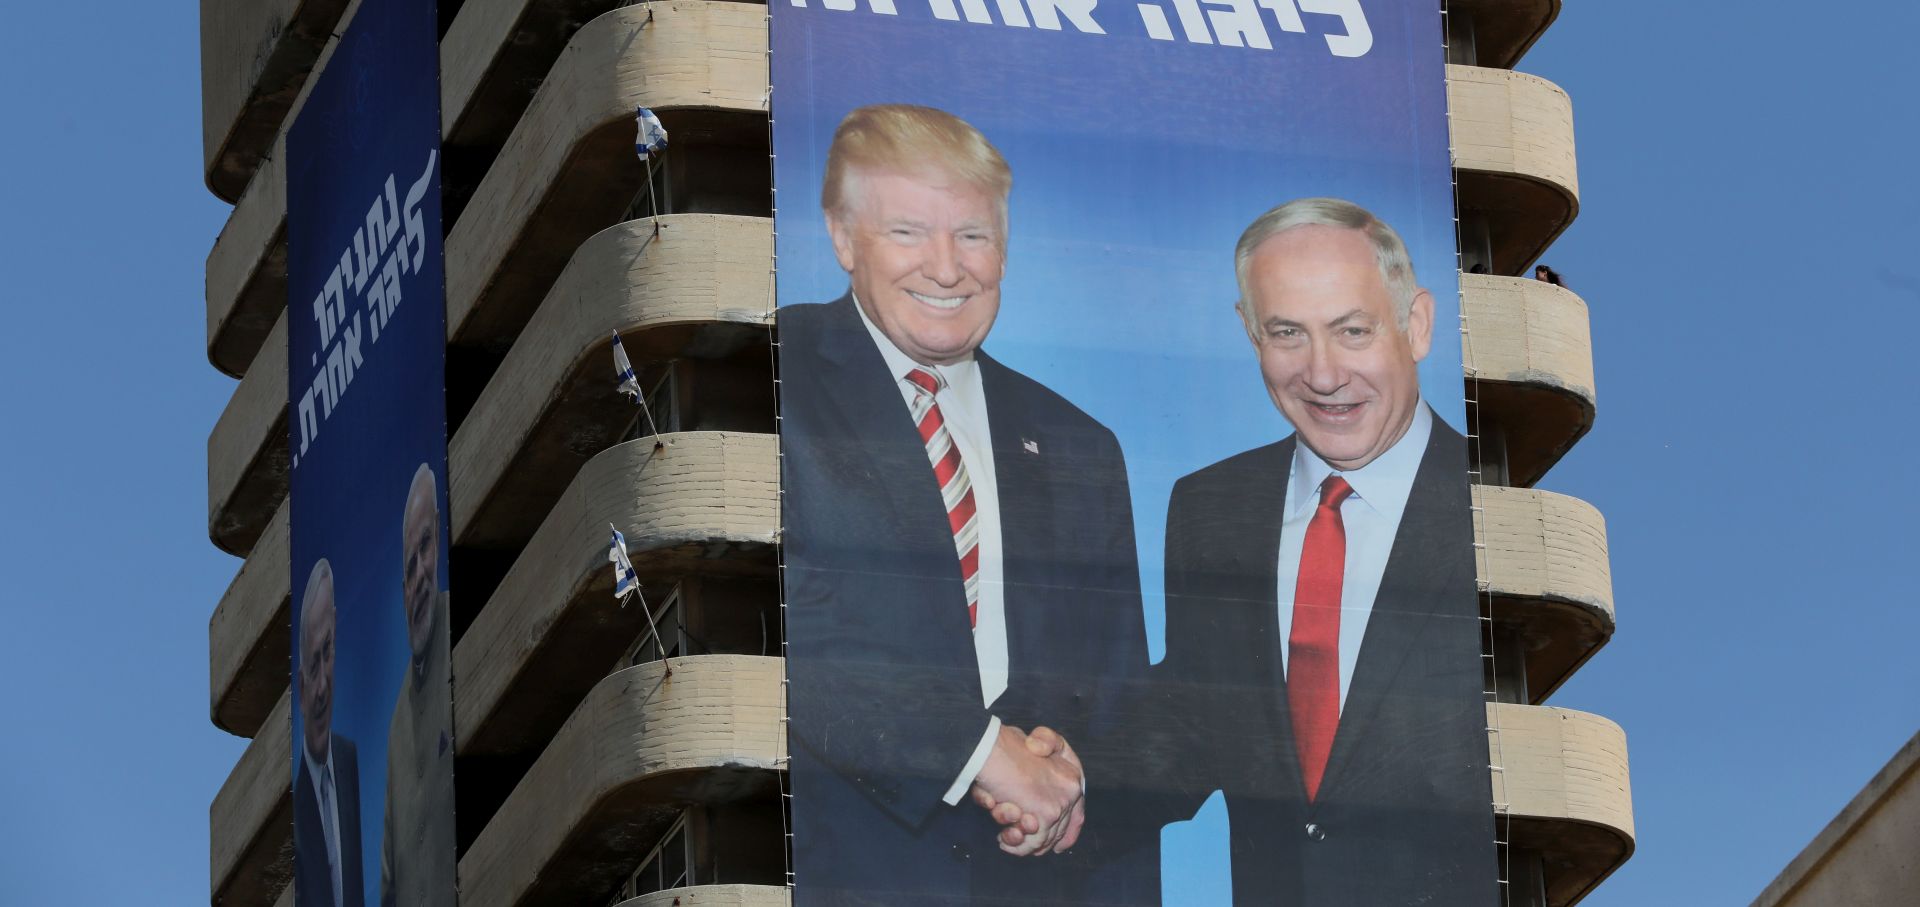 epa07750144 An election campaign billboard of the ruling Likud party shows  Israeli Prime Minister Benjamin Netanyahu (R) shakes hands with US President Donald Trump (L) in Metzudat Ze'ev, the headquarters of the Likud party in Tel Aviv, Israel, 31 July 2019. Israel's legislative elections is scheduled for 17 September 2019.  EPA/ABIR SULTAN